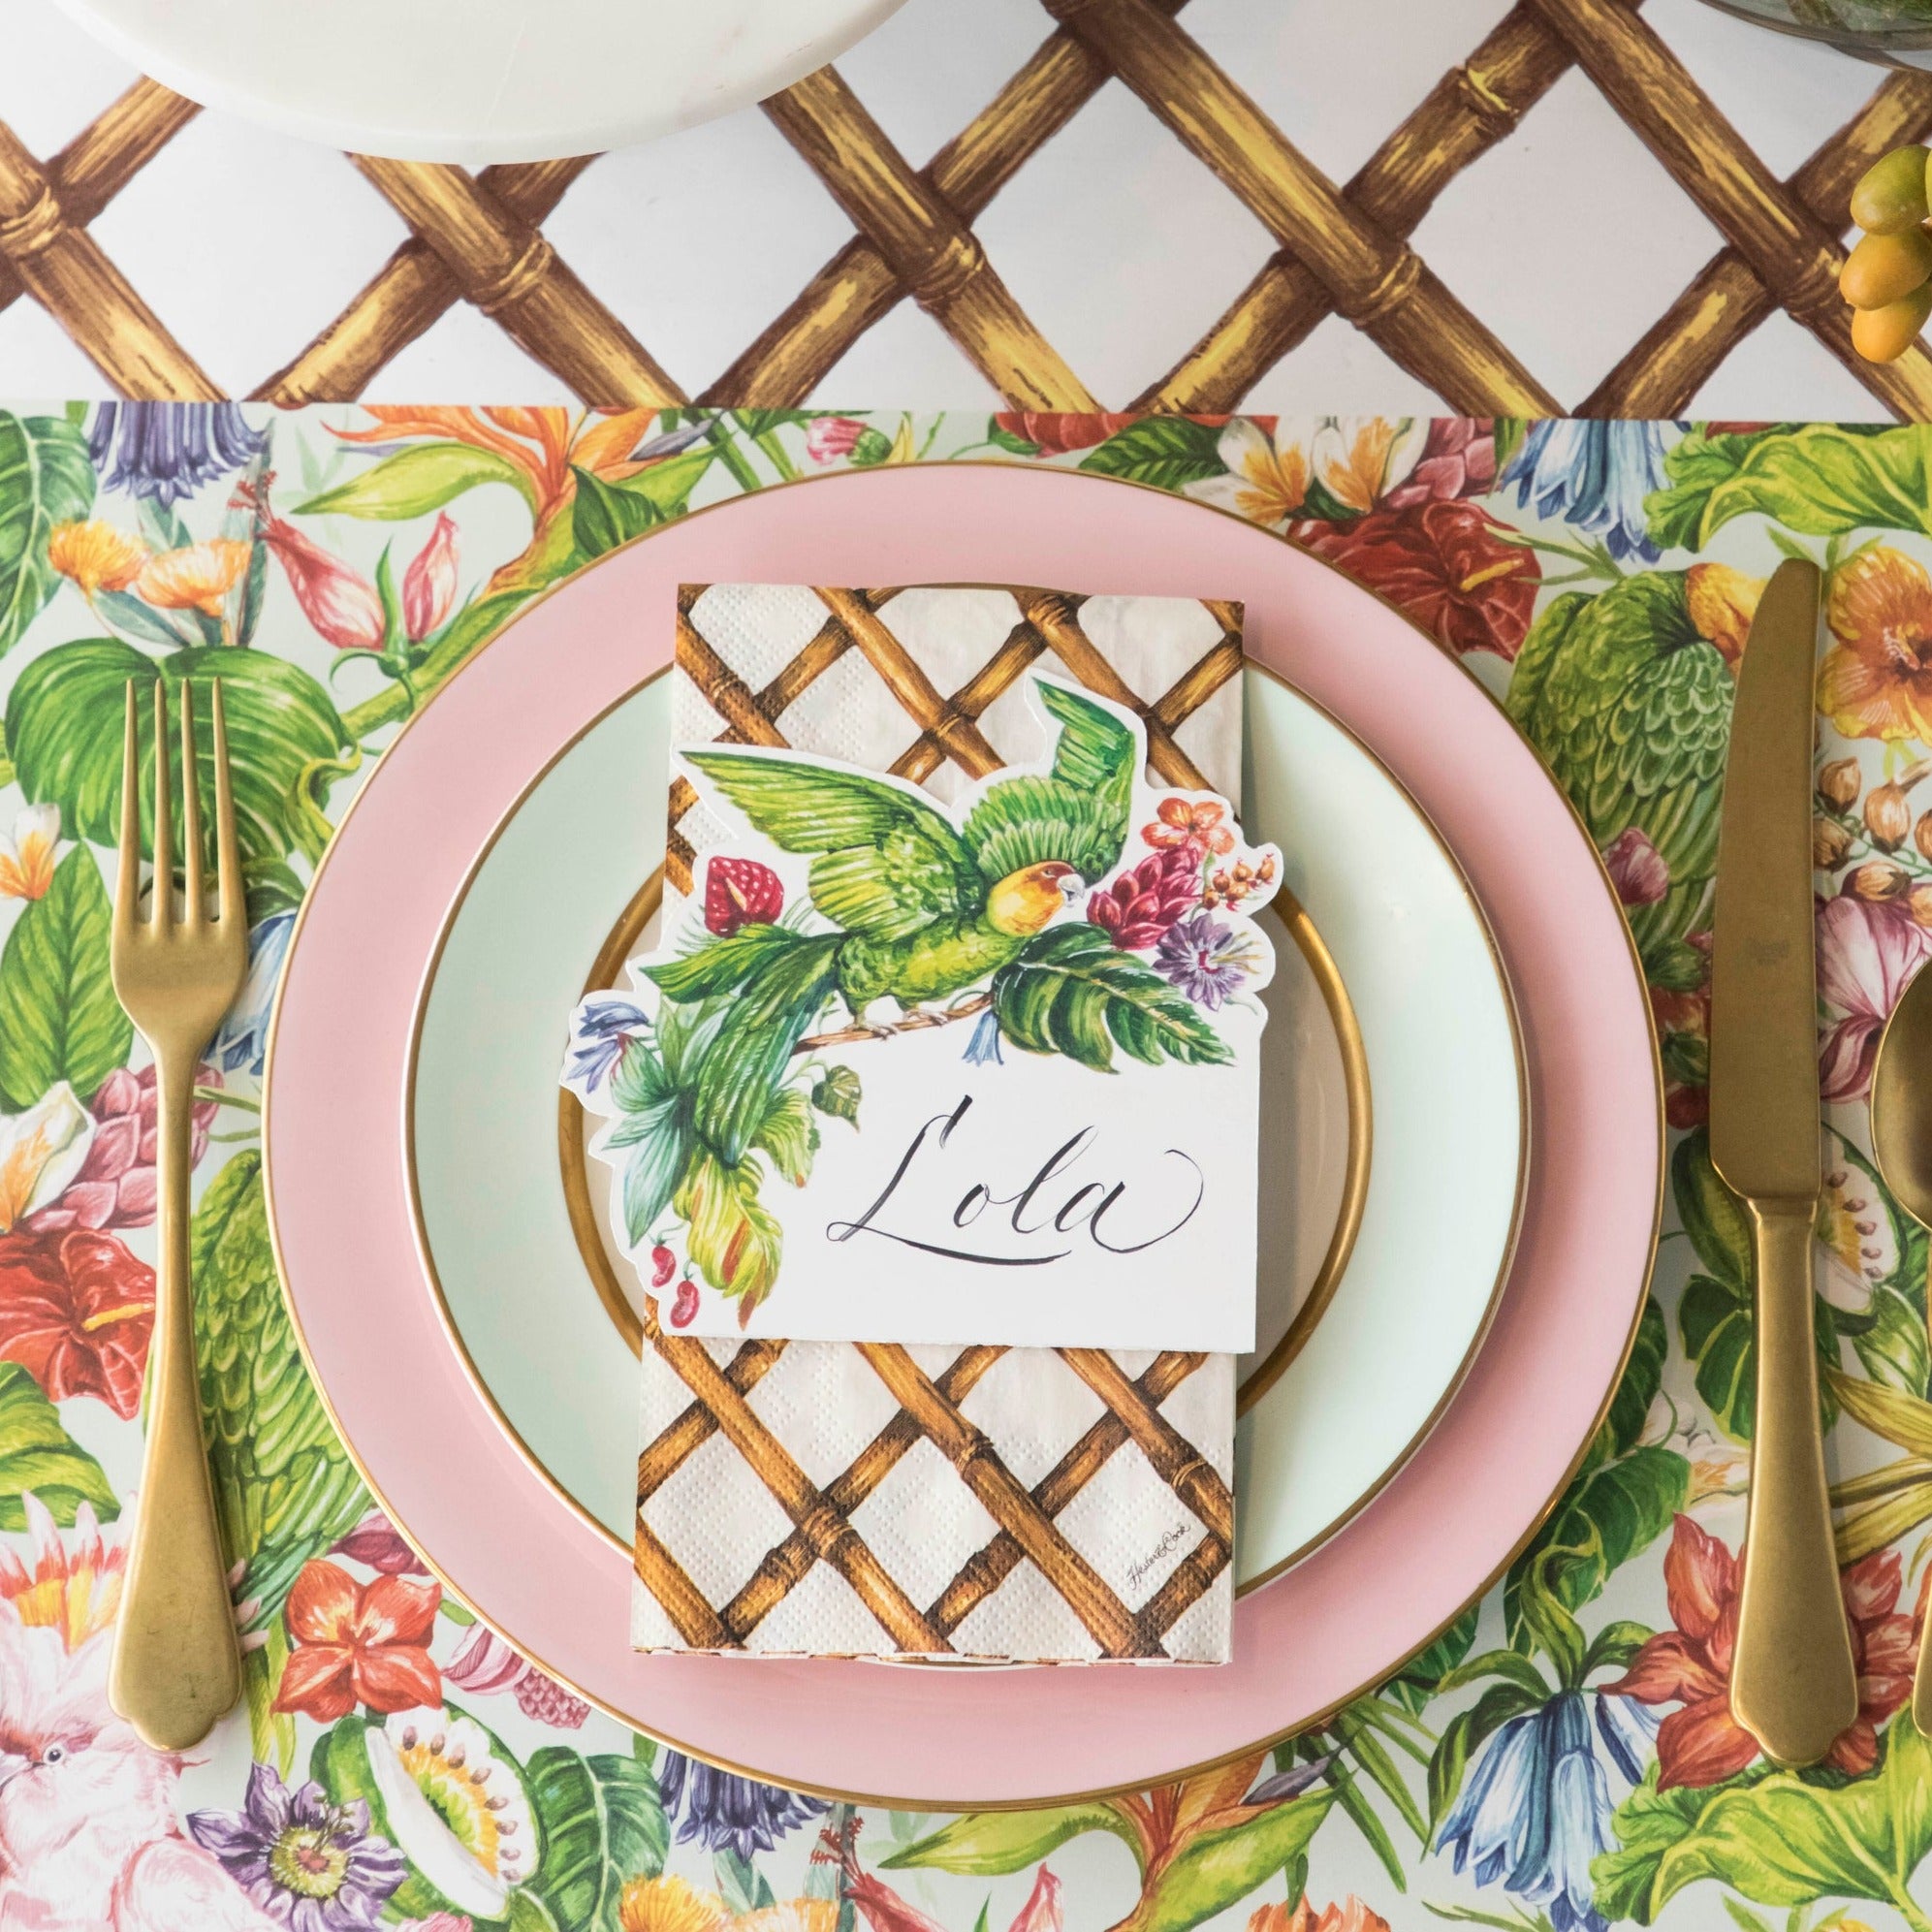 A Birds of Paradise Placemat under a tropical themed place setting. 